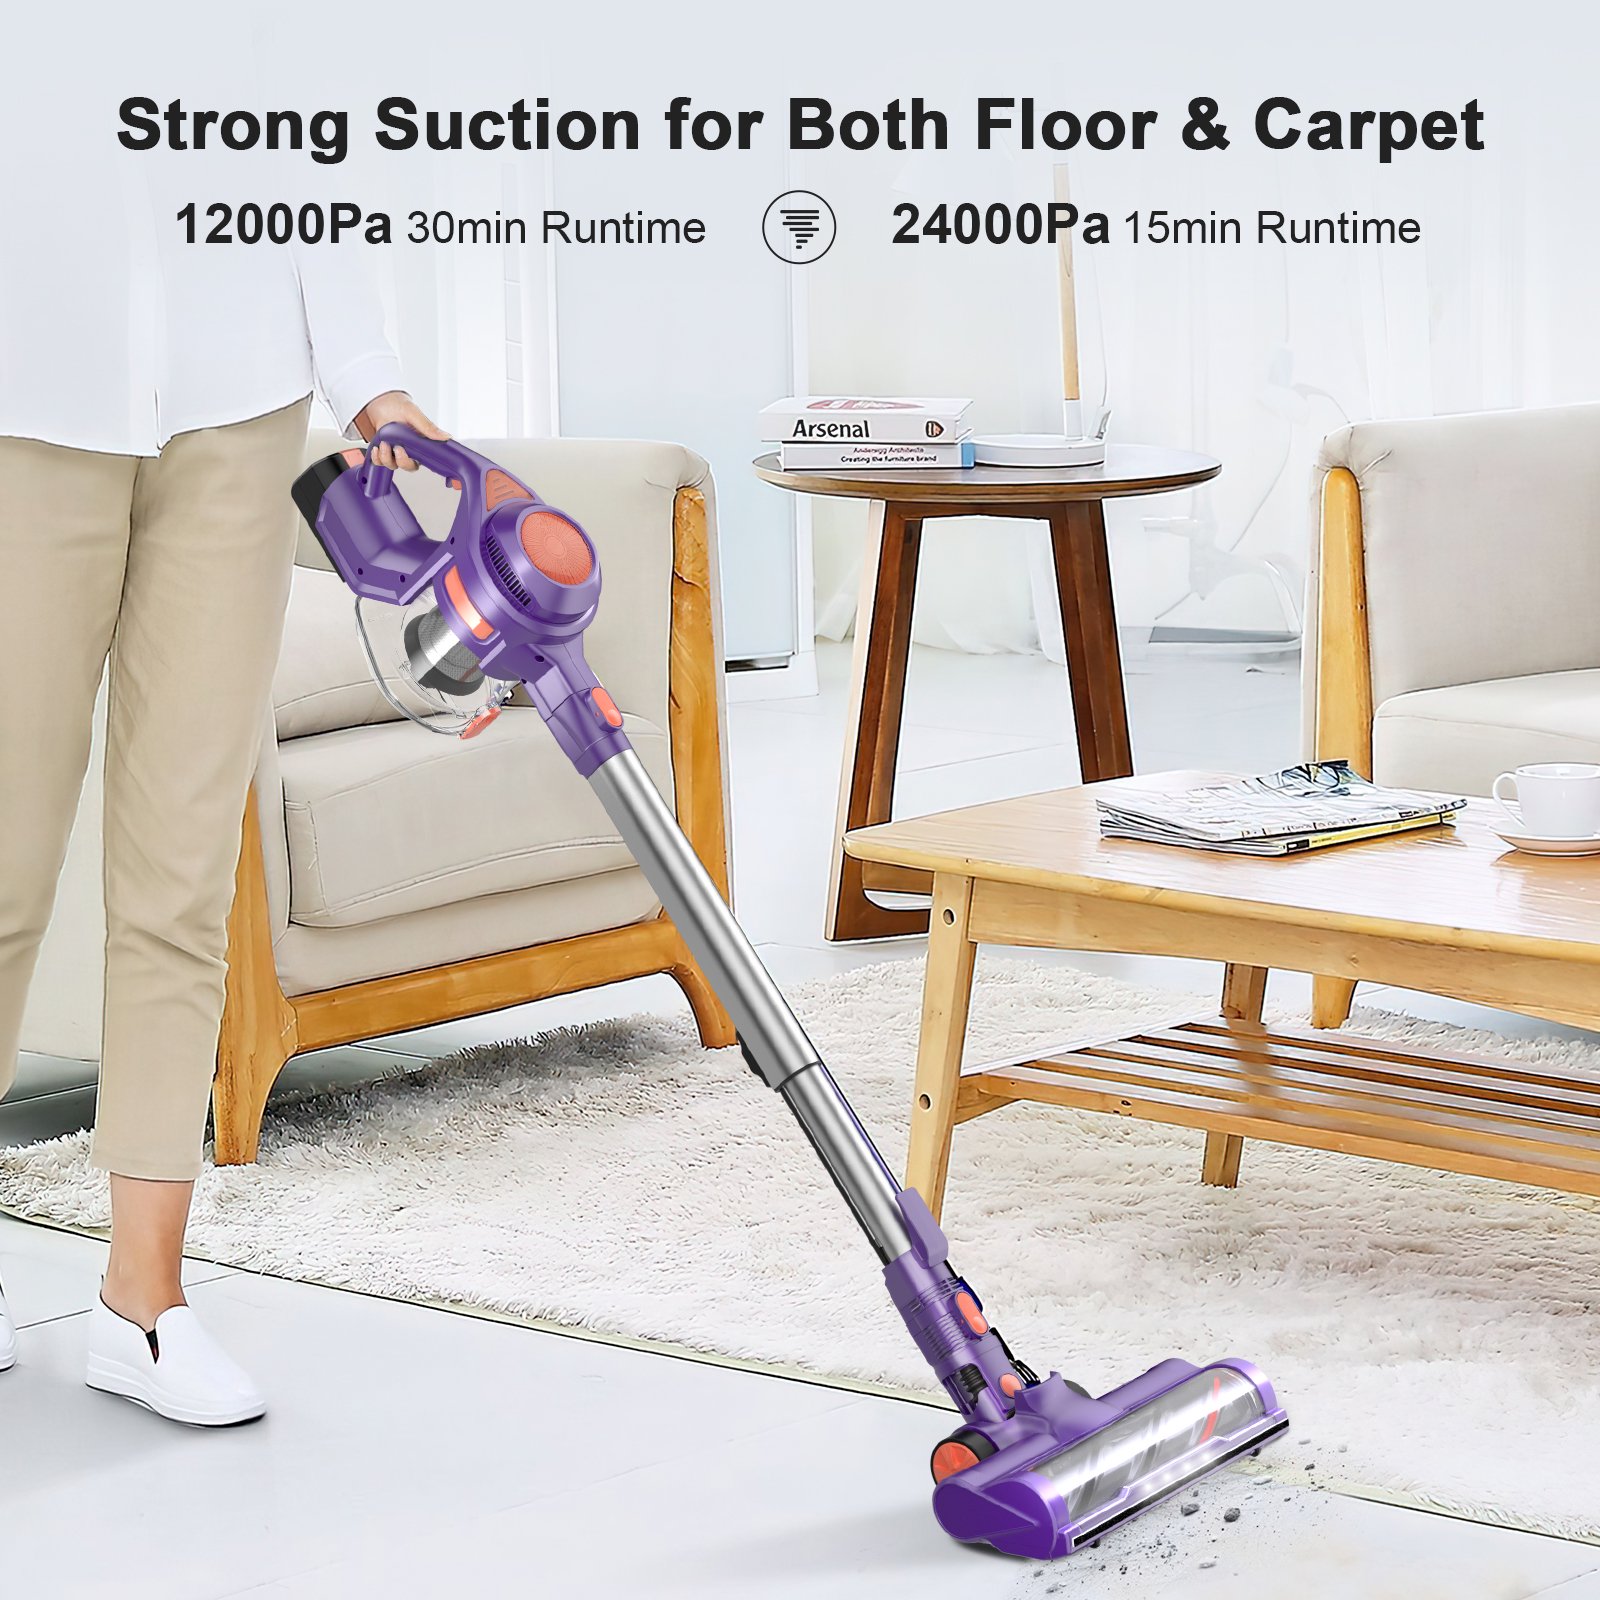 MOOSOO Cordless Vacuum Strong Suction Quiet Lightweight 4 in 1 Stick Vacuum Cleaner - image 3 of 8